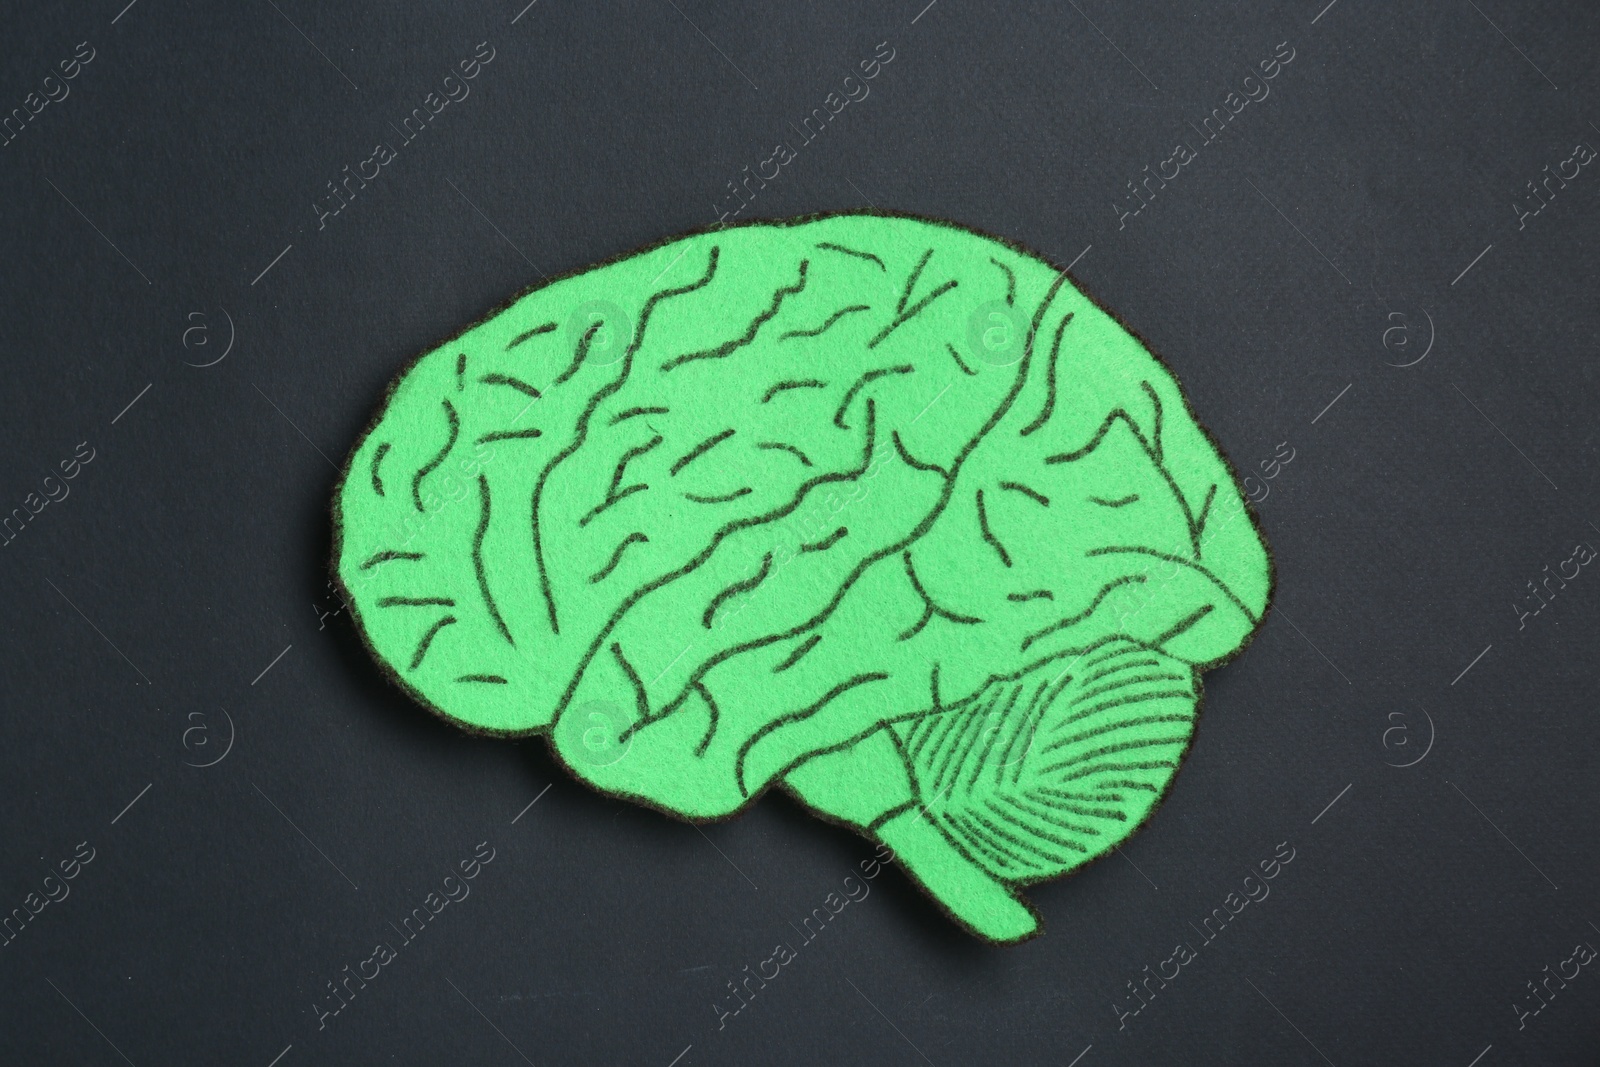 Photo of Paper cutout of human brain on black background, top view